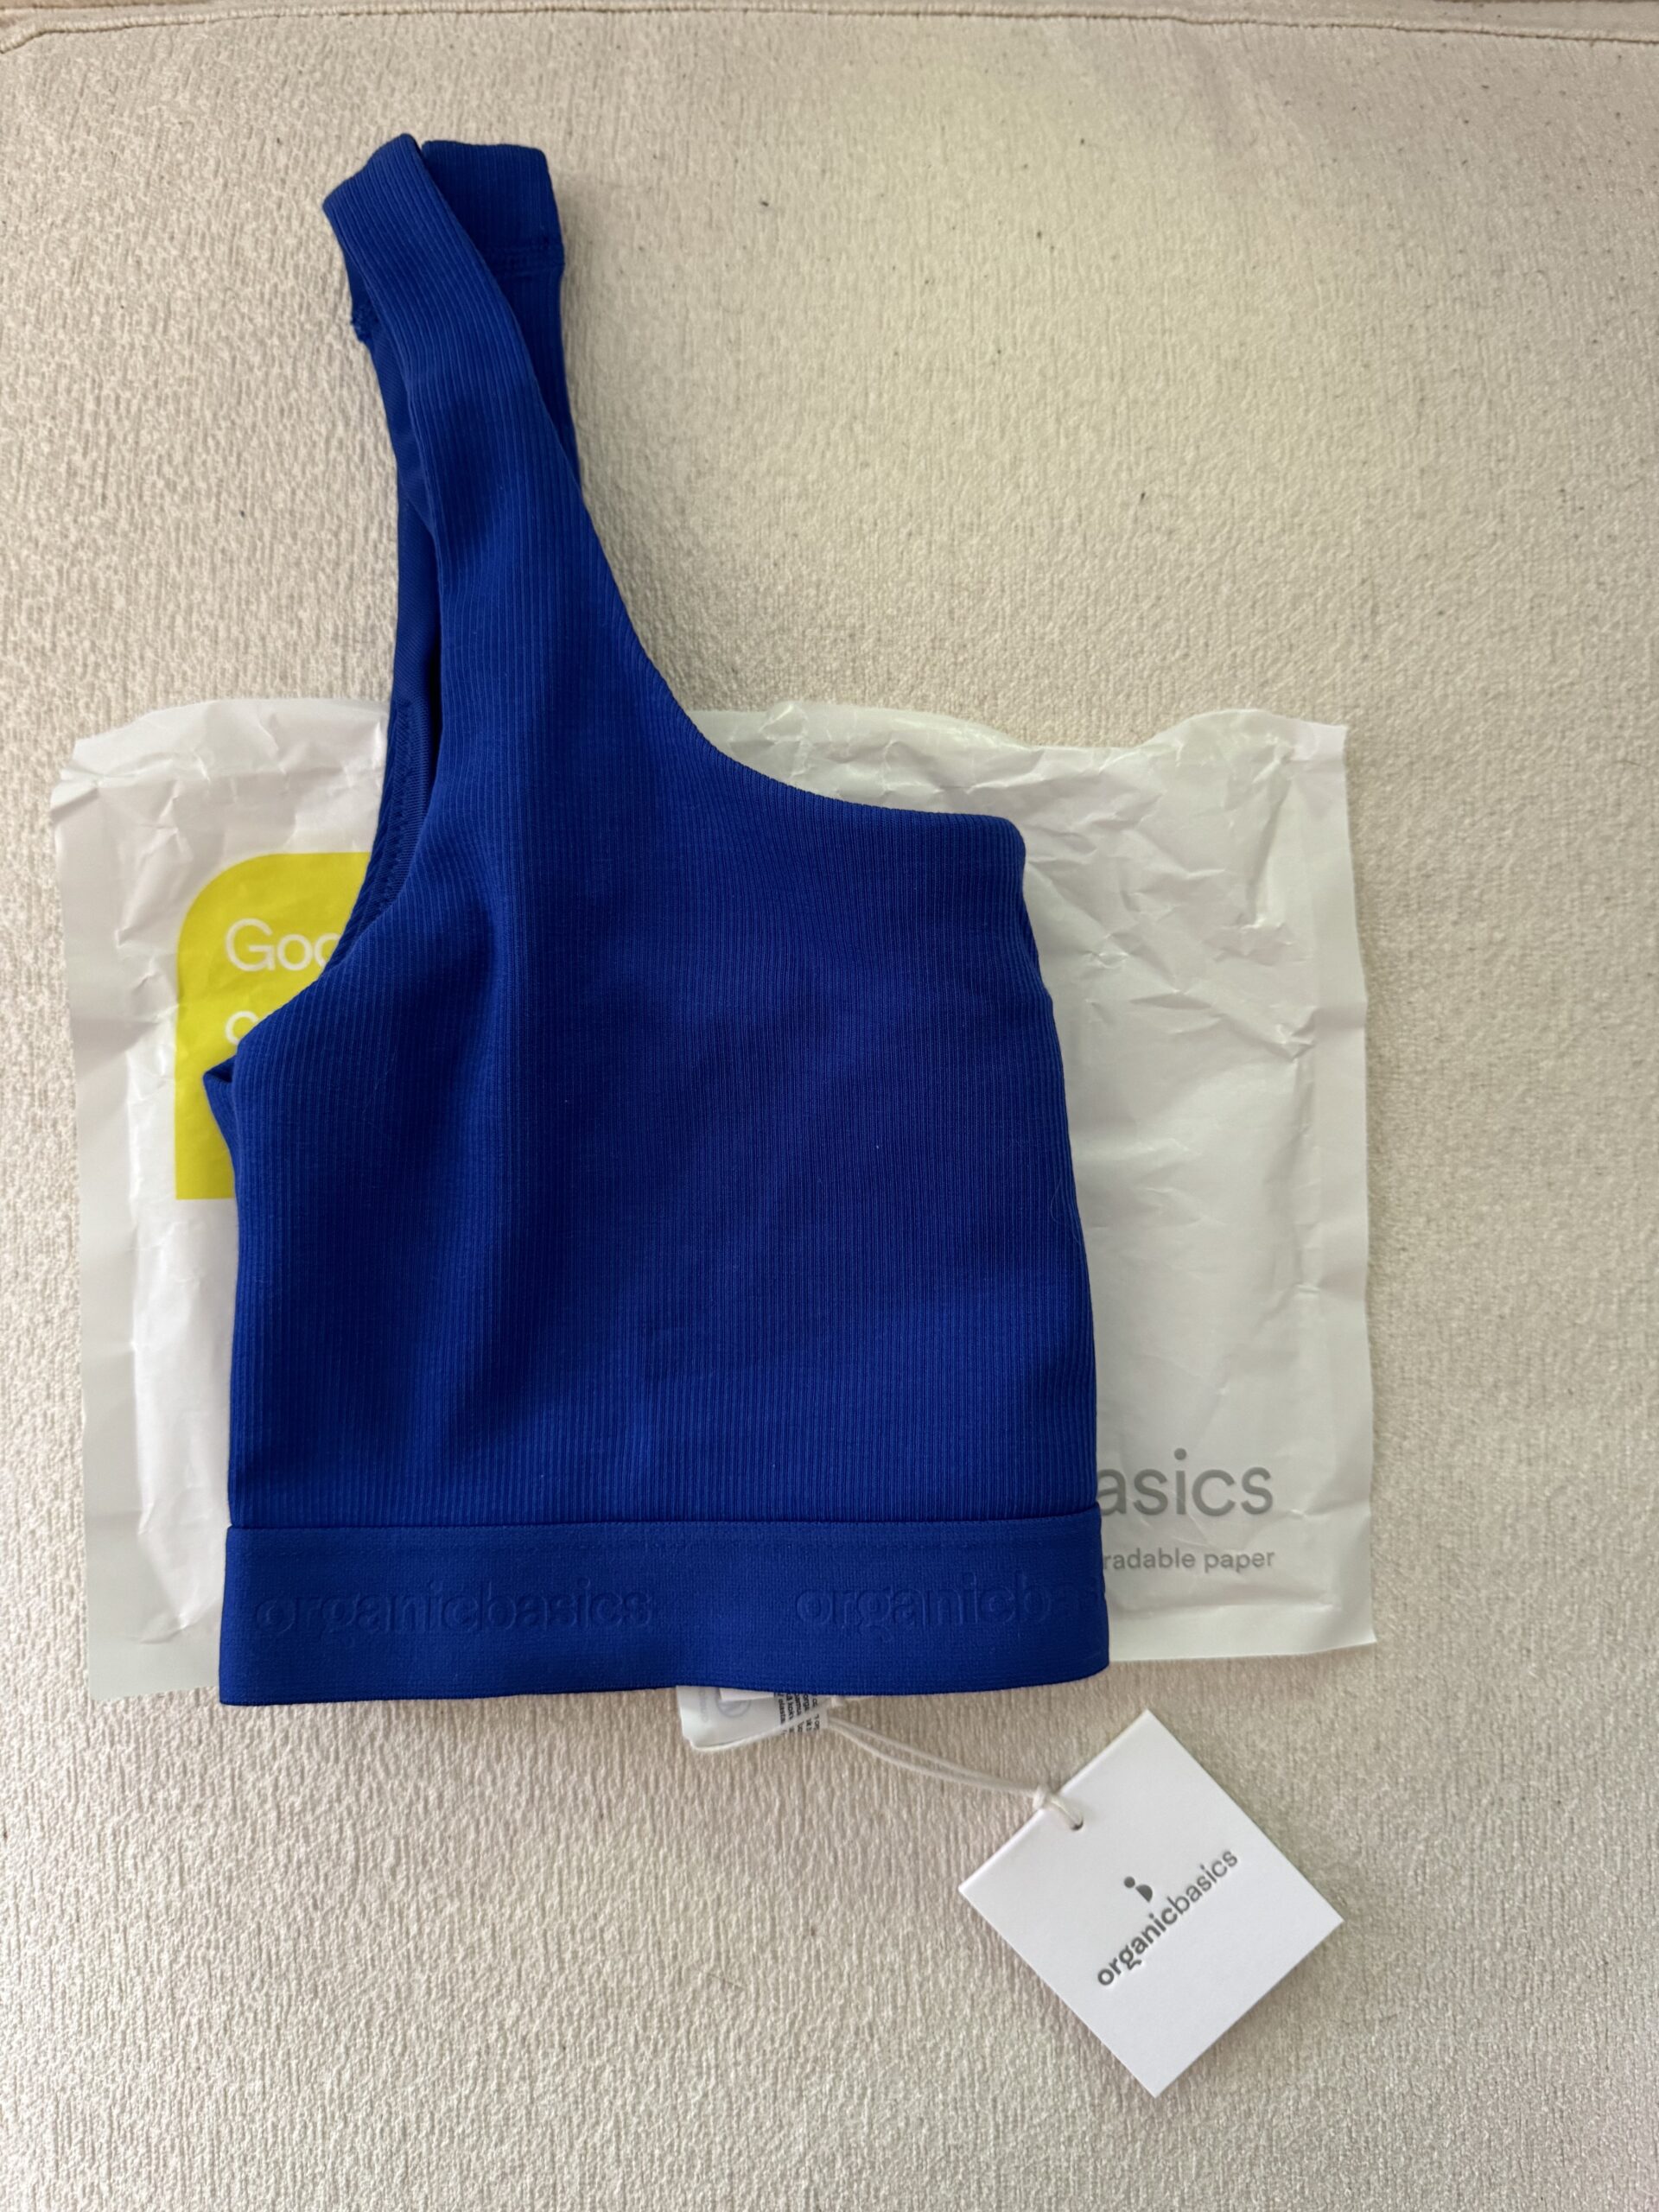 A blue one-shoulder top with a white tag laying on a white organic cotton diaper package, viewed from above.